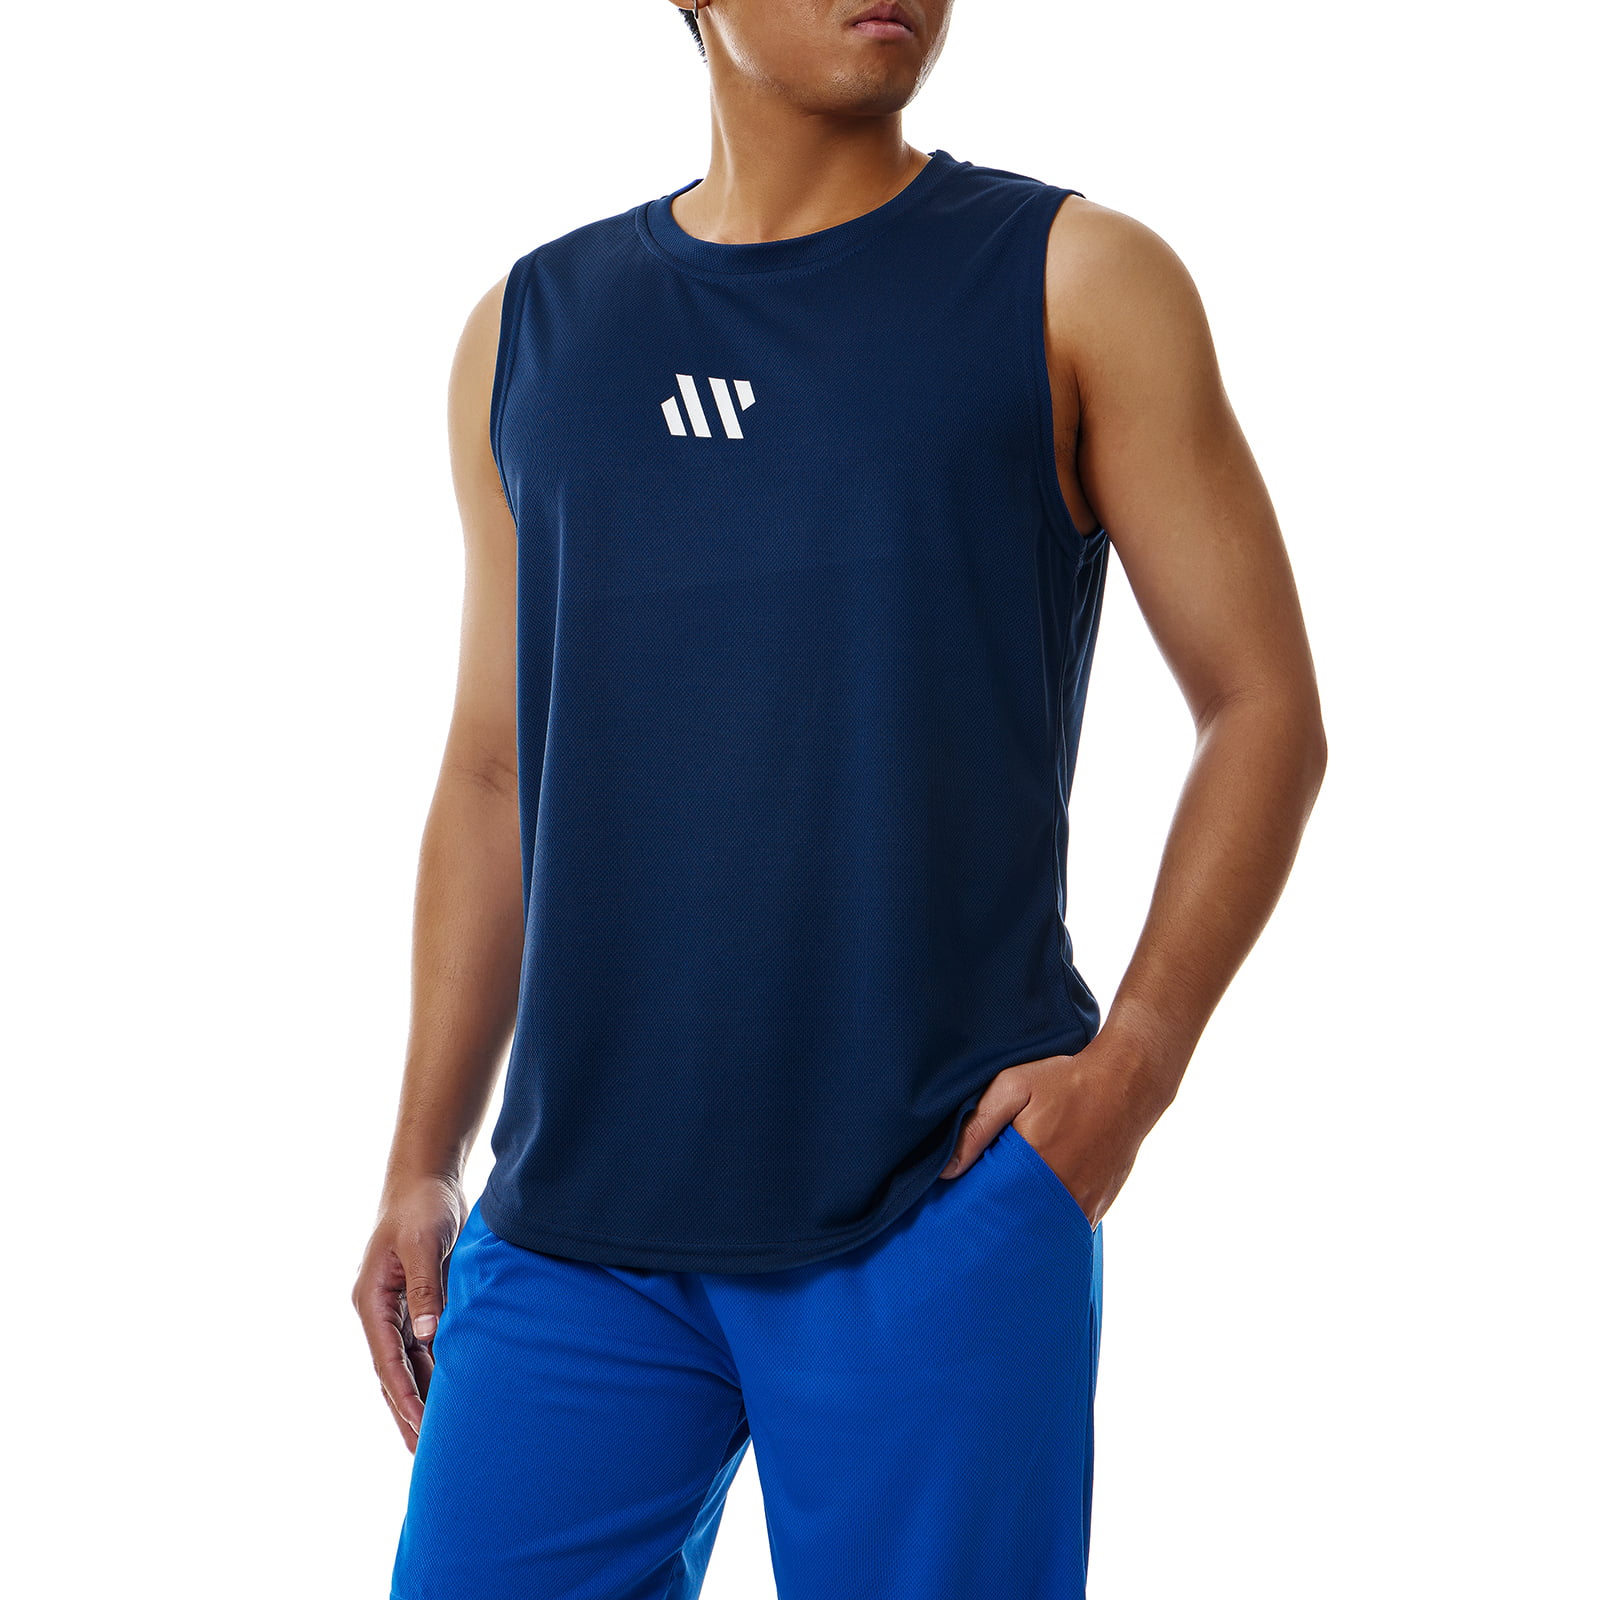 Mens Vests 100% Cotton Sleeveless Coloured Vest Gym Training Running Top S-XXL 2 Pack 